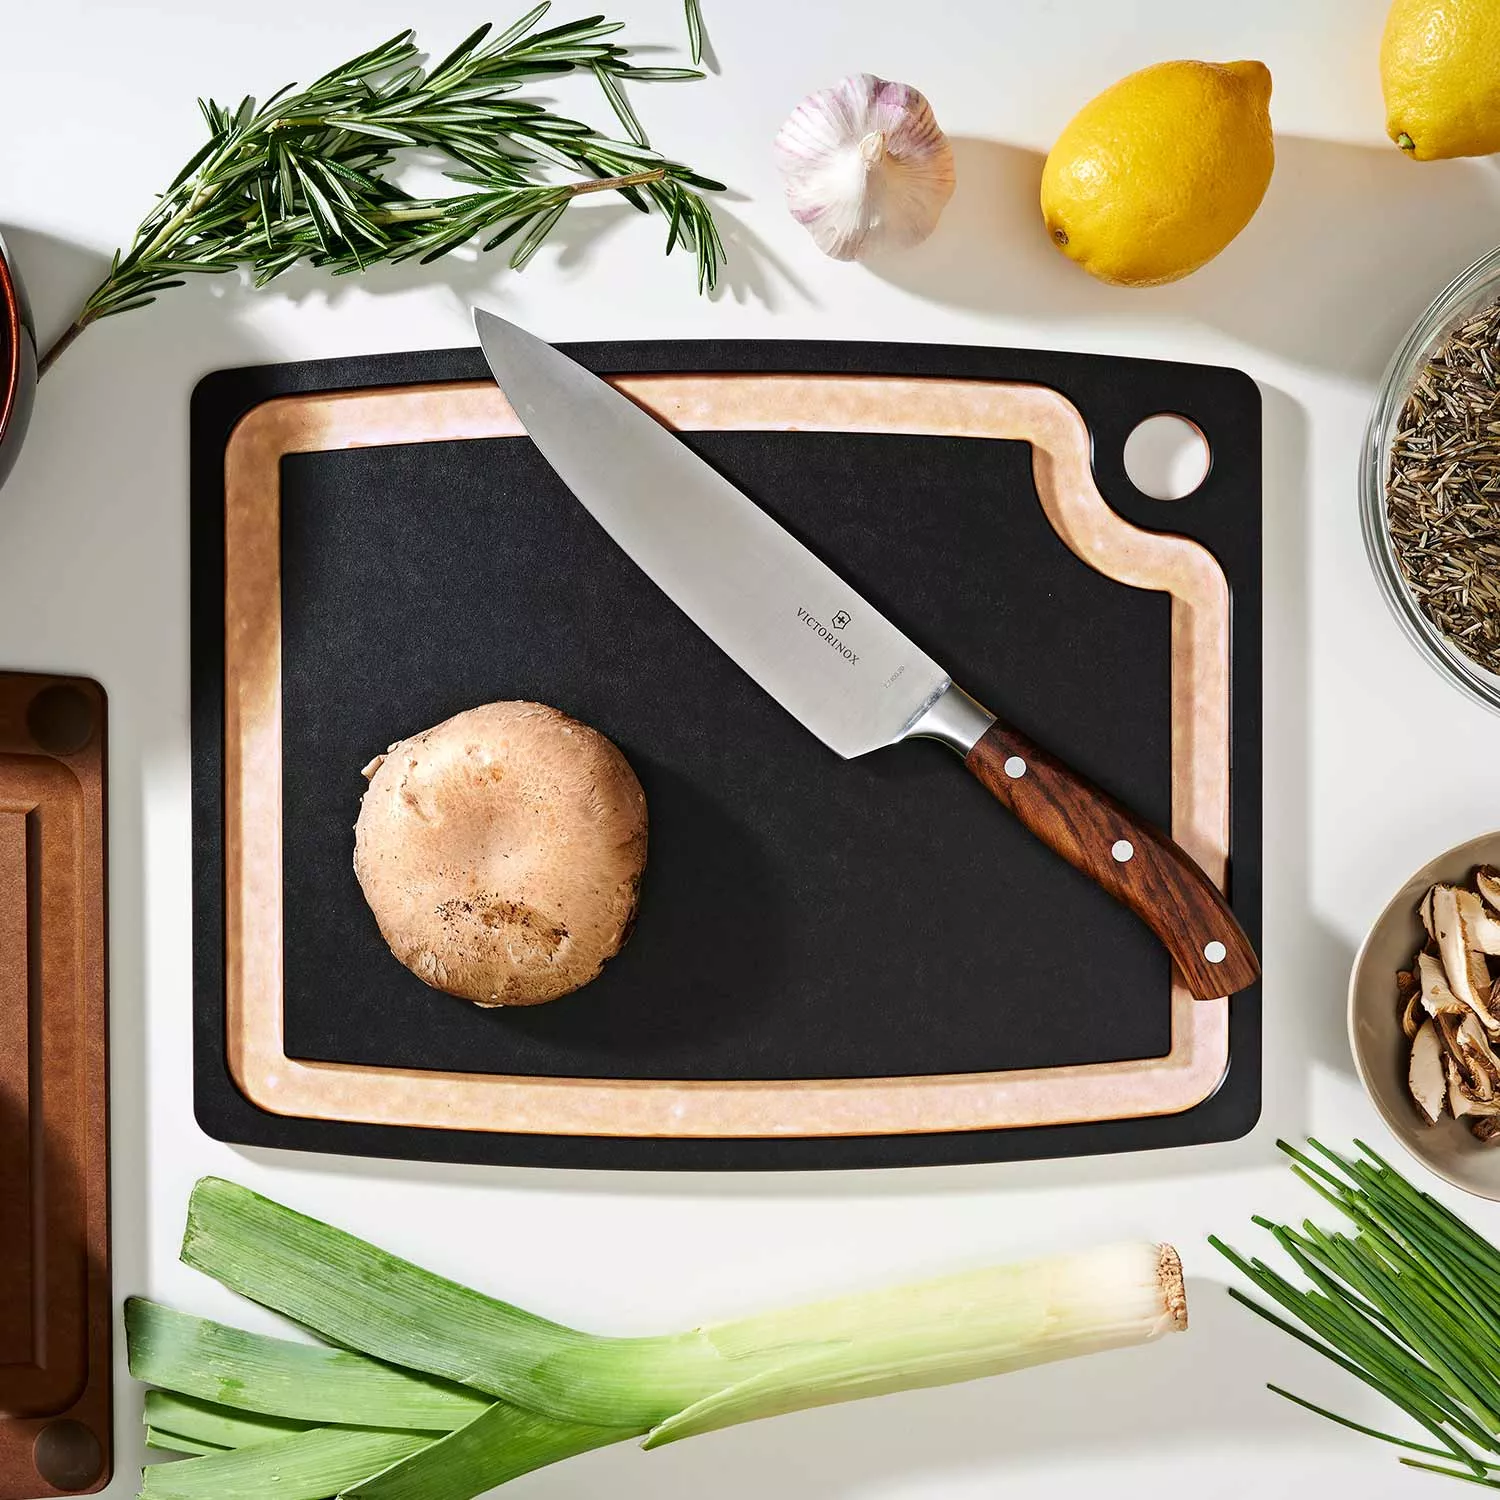 Epicurean Gourmet Cutting Board Set - 3 Piece – Cutlery and More